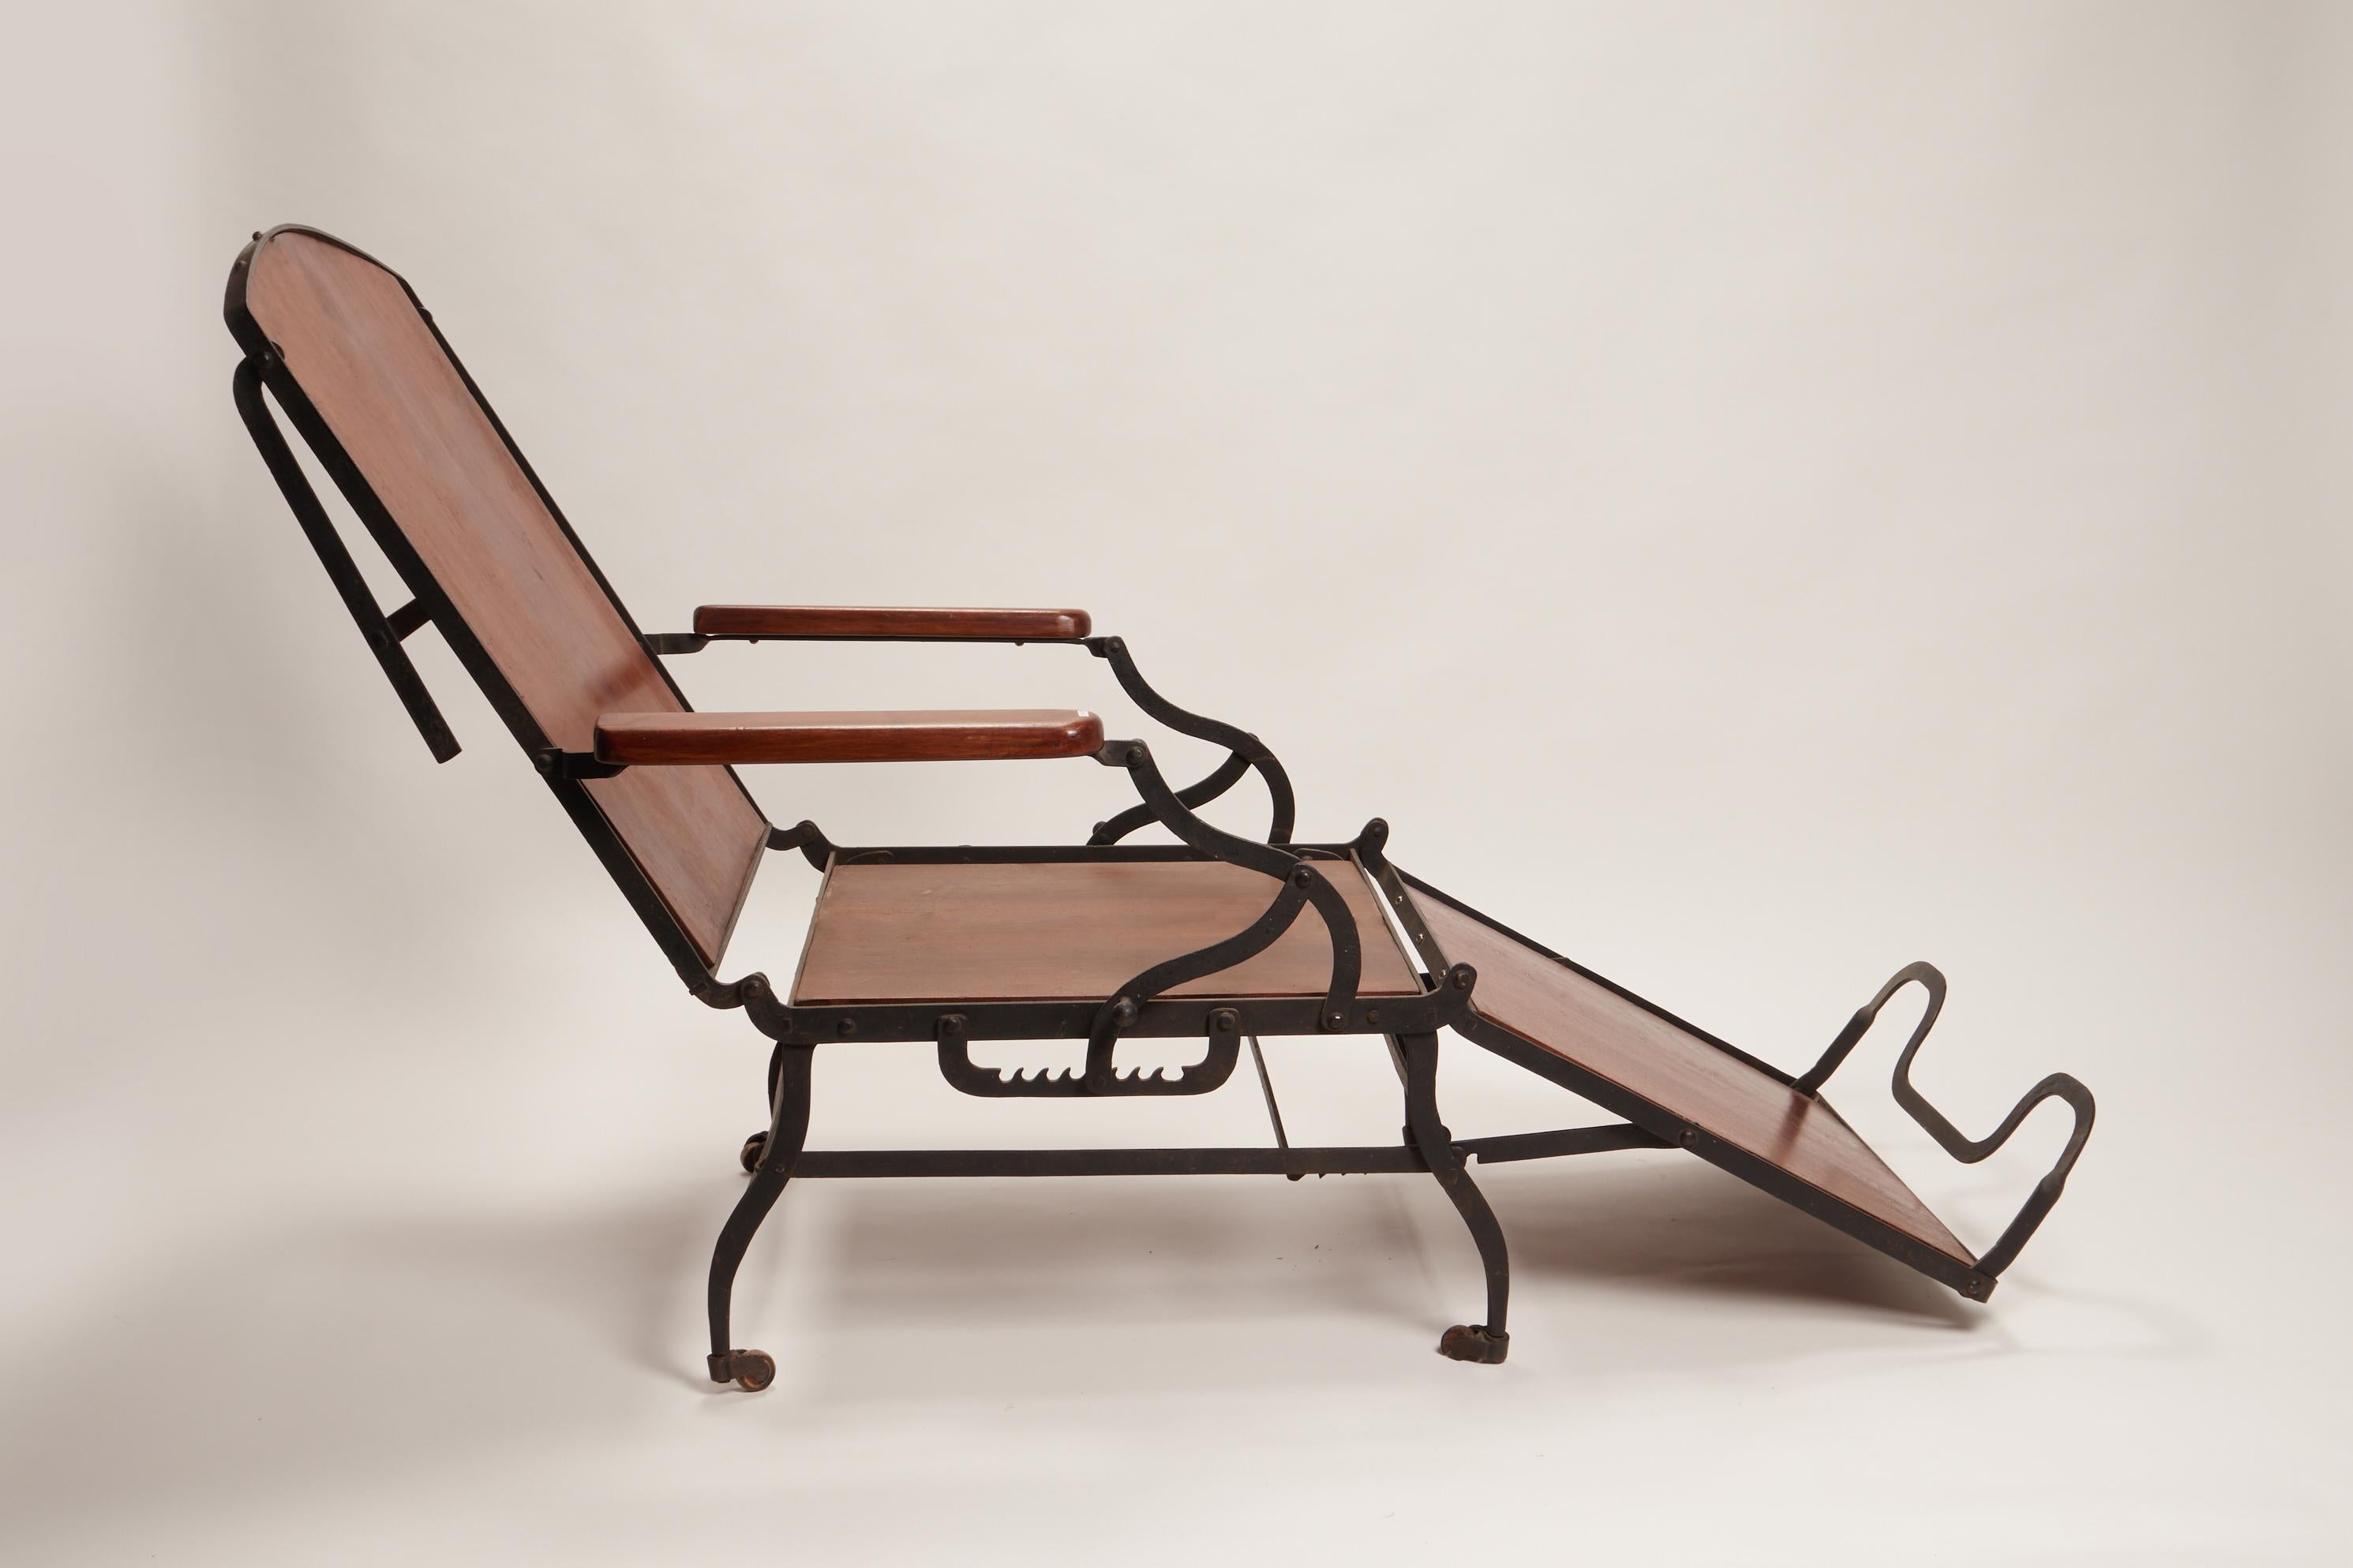 Folded cruise ship rocking chaise-longue made out of oak wood. Manufactured by Marks, New York, 1890 ca.